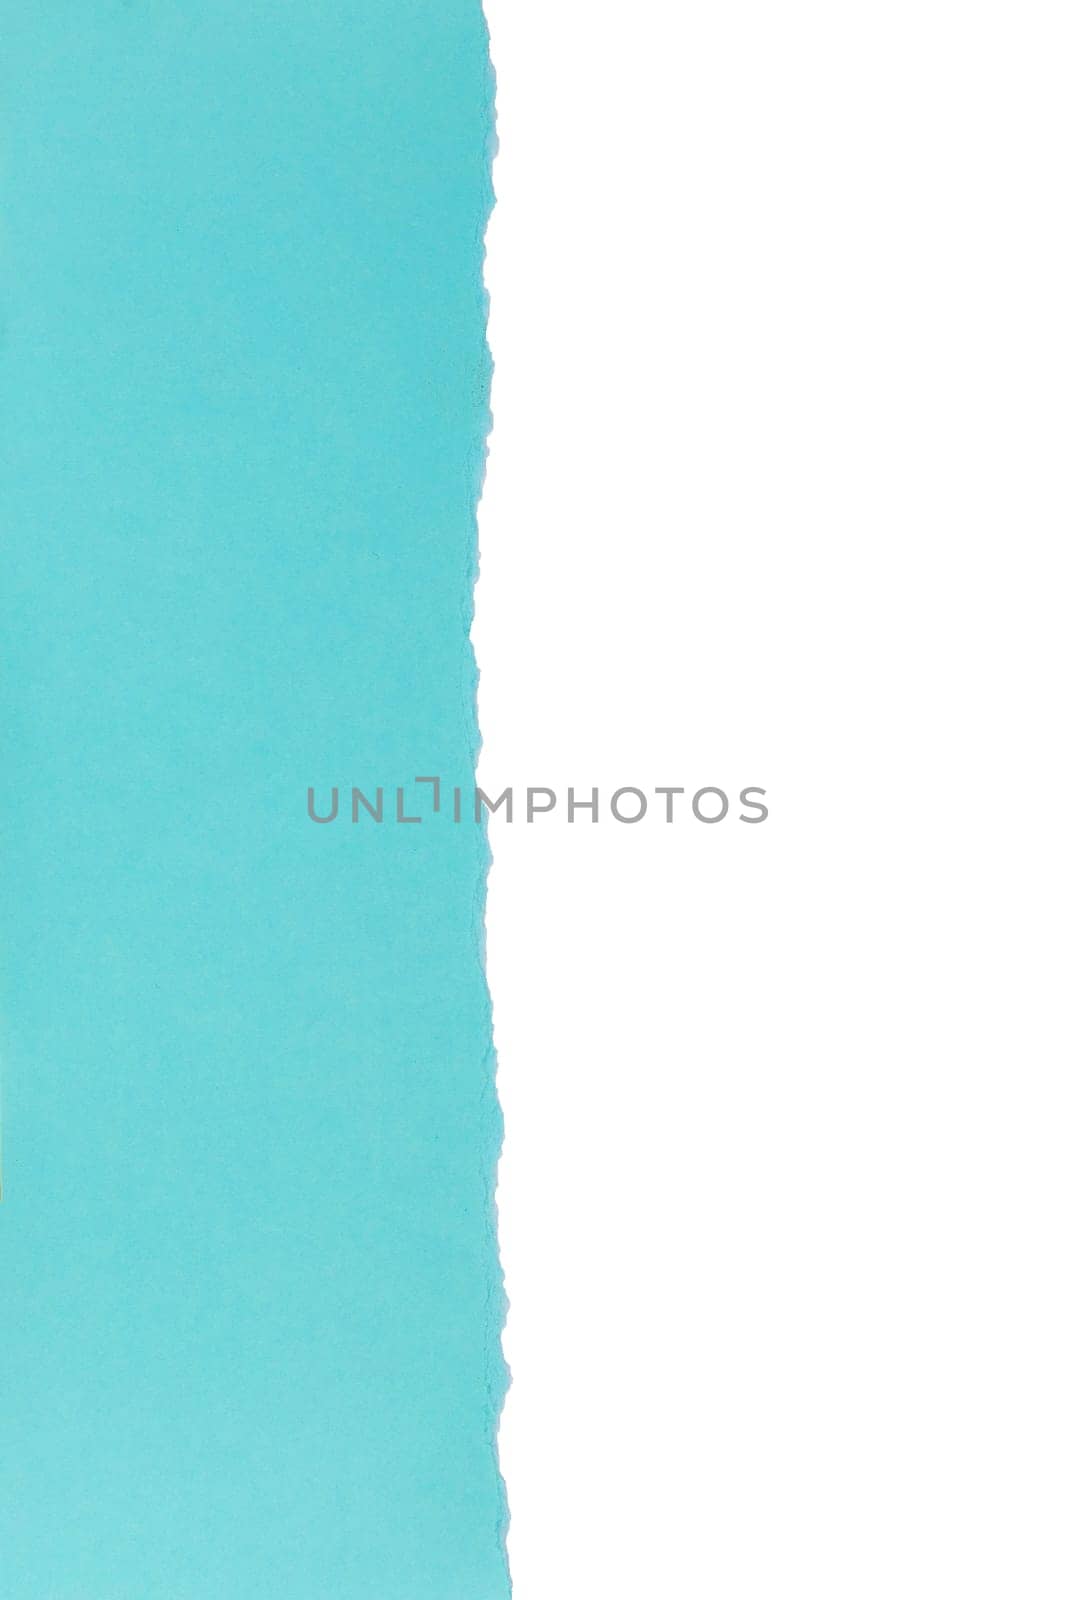 Blue paper torn in half page isolated on white background. Vertical